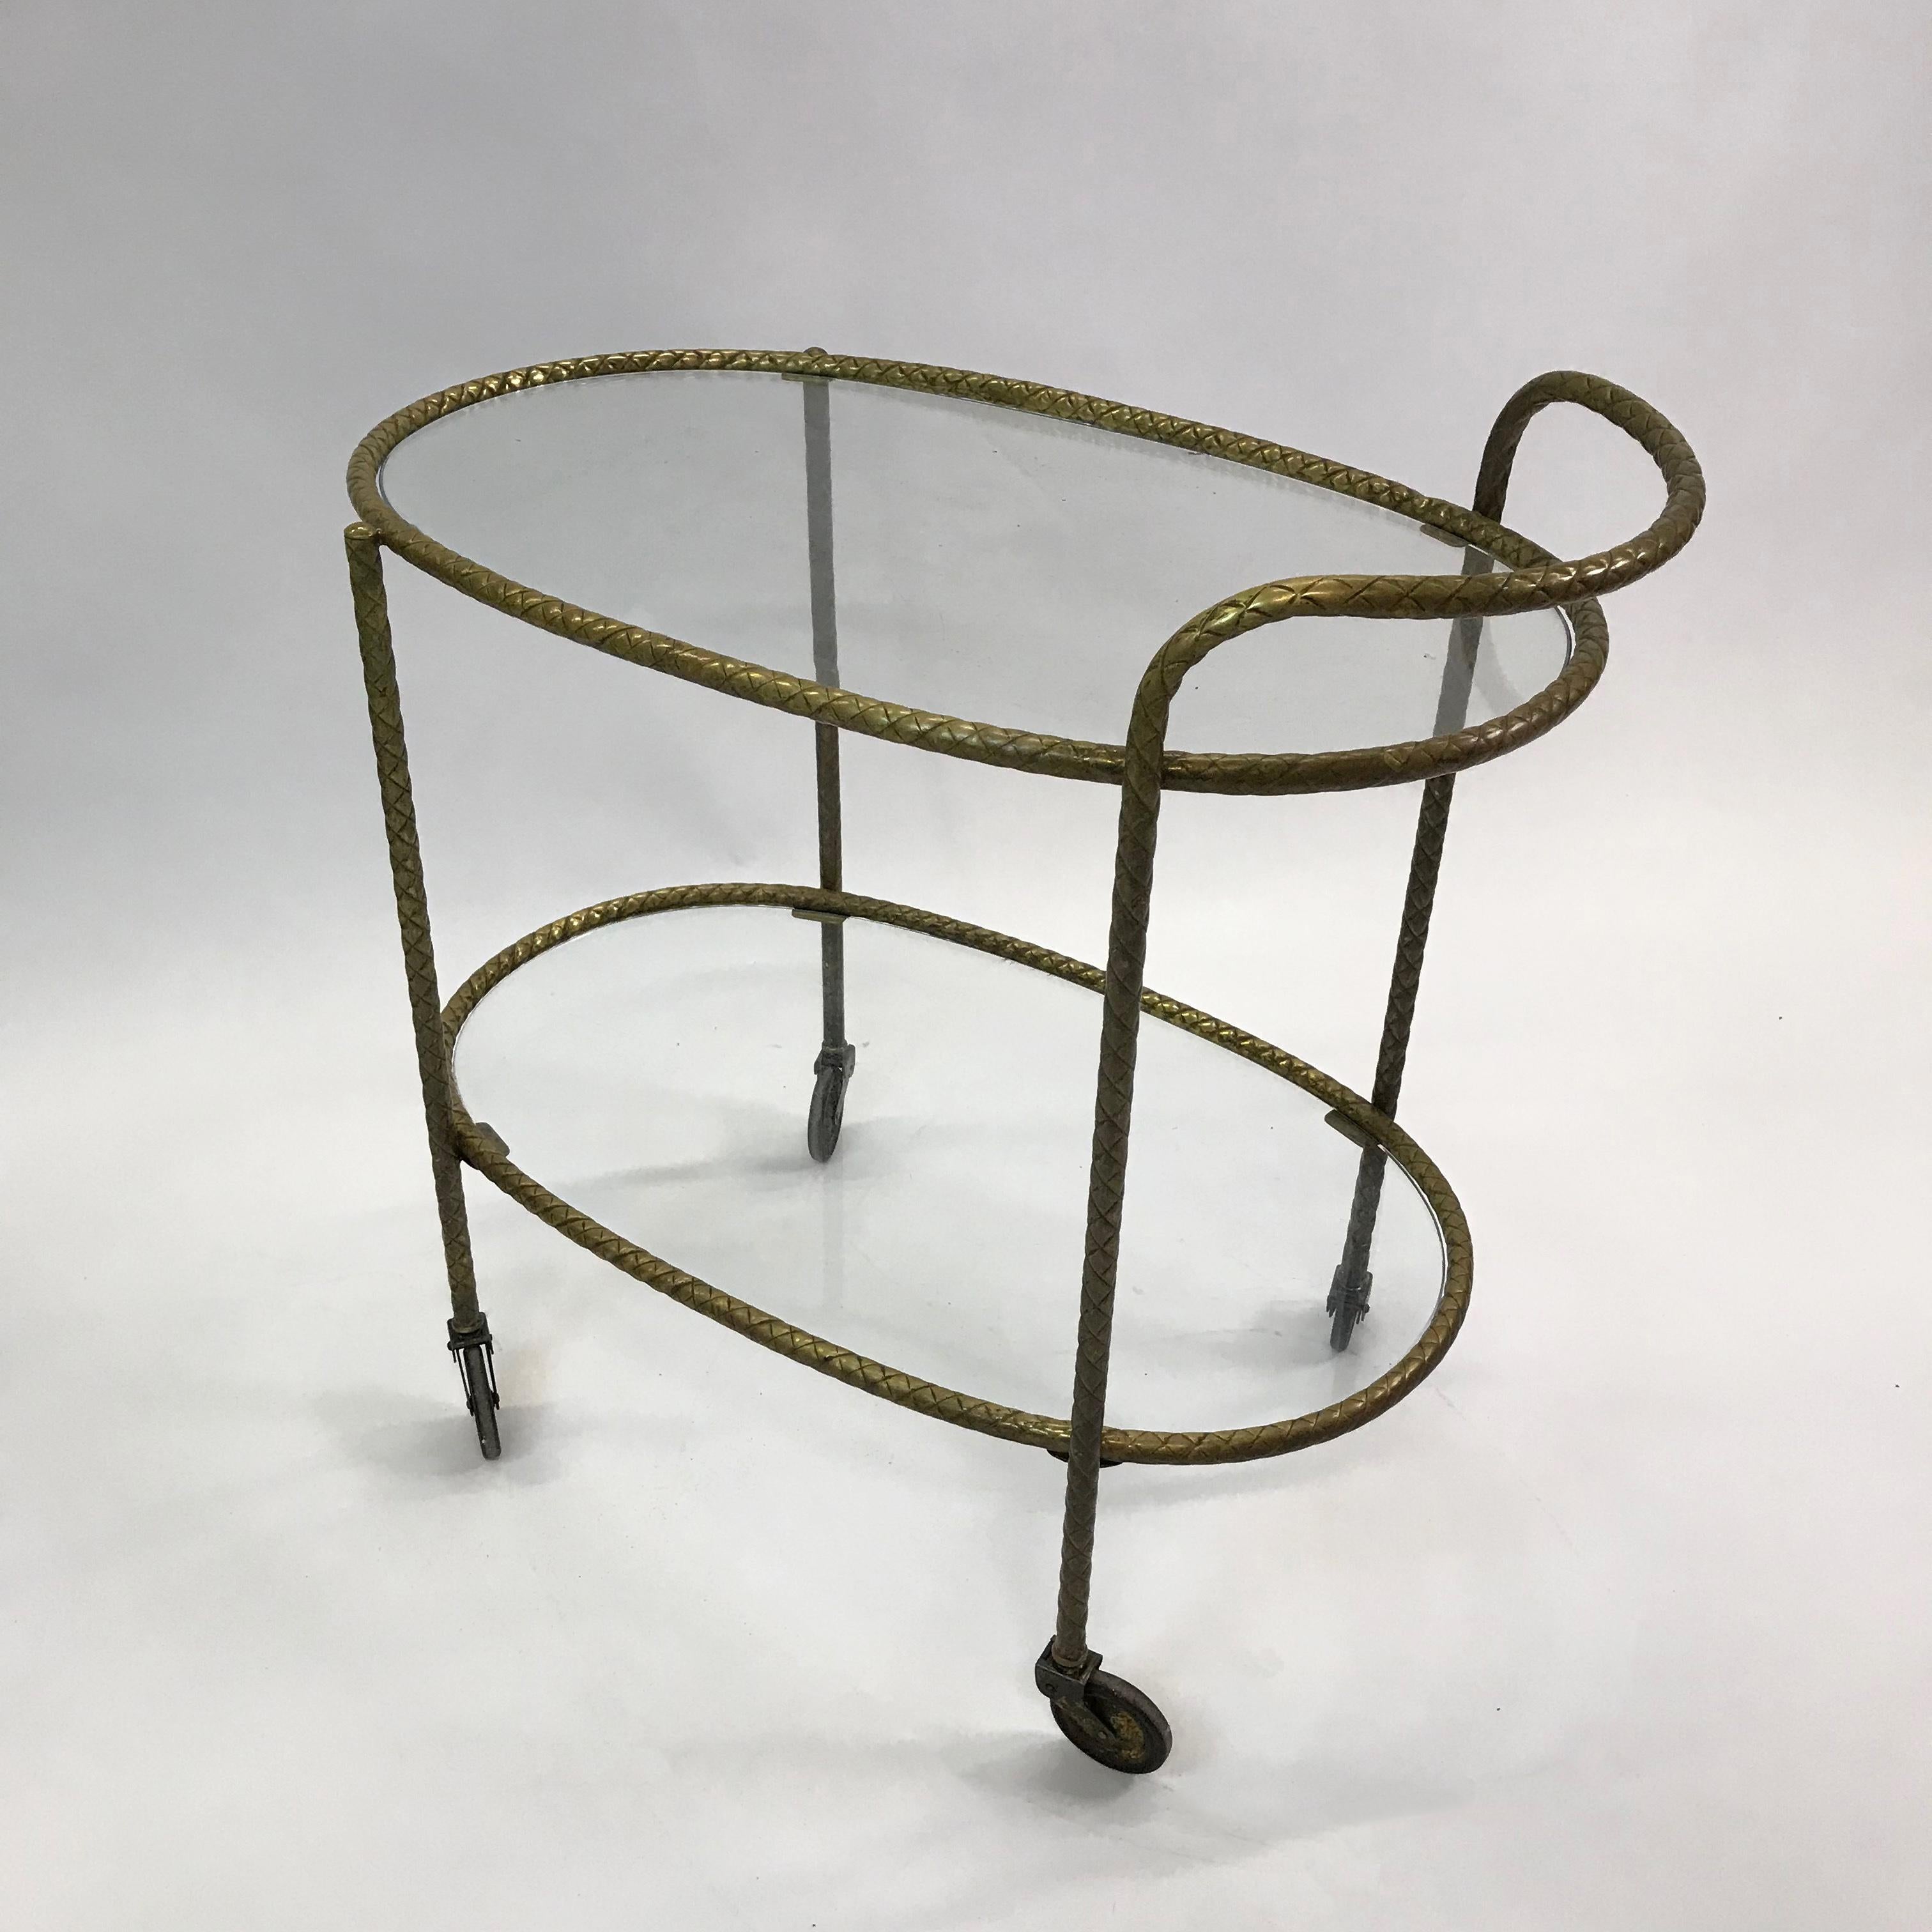 Lovely and unique, Hollywood Regency bar or serving cart trolley features a two-tiered, oval frame of braided, rope motif, brass with glass shelves, handle and wheels for ease of serving.